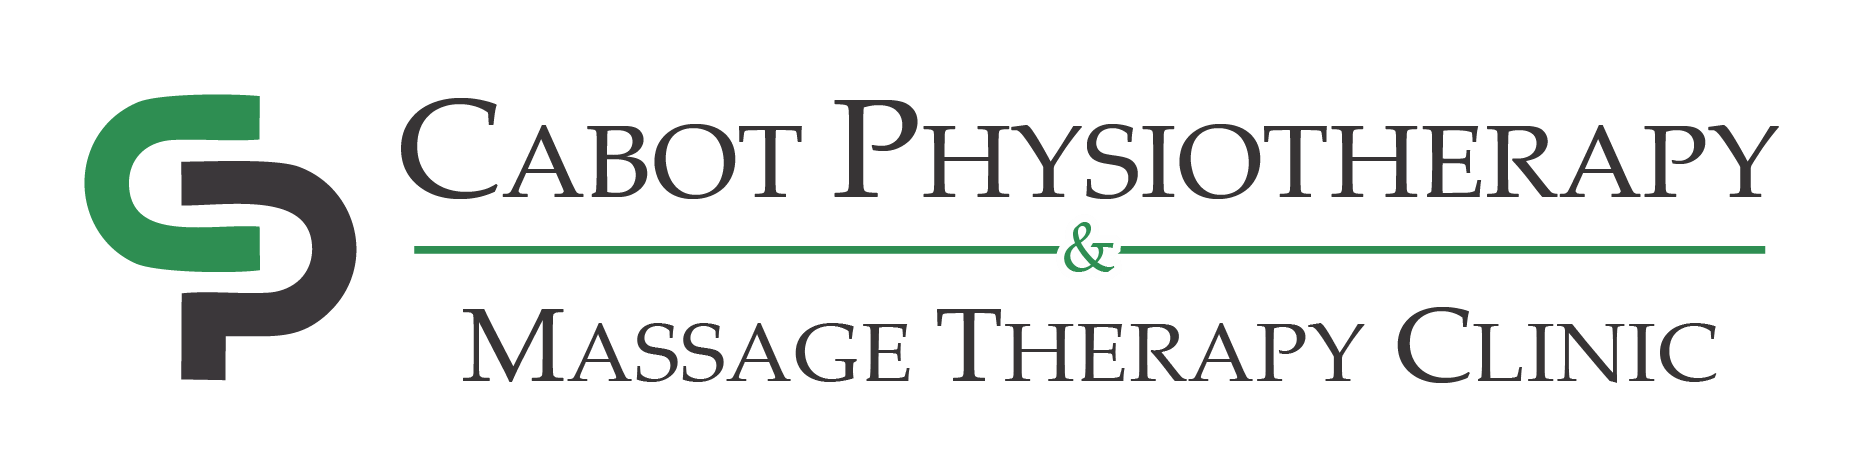 Cabot Physiotherapy Teal to Heal Sponsor